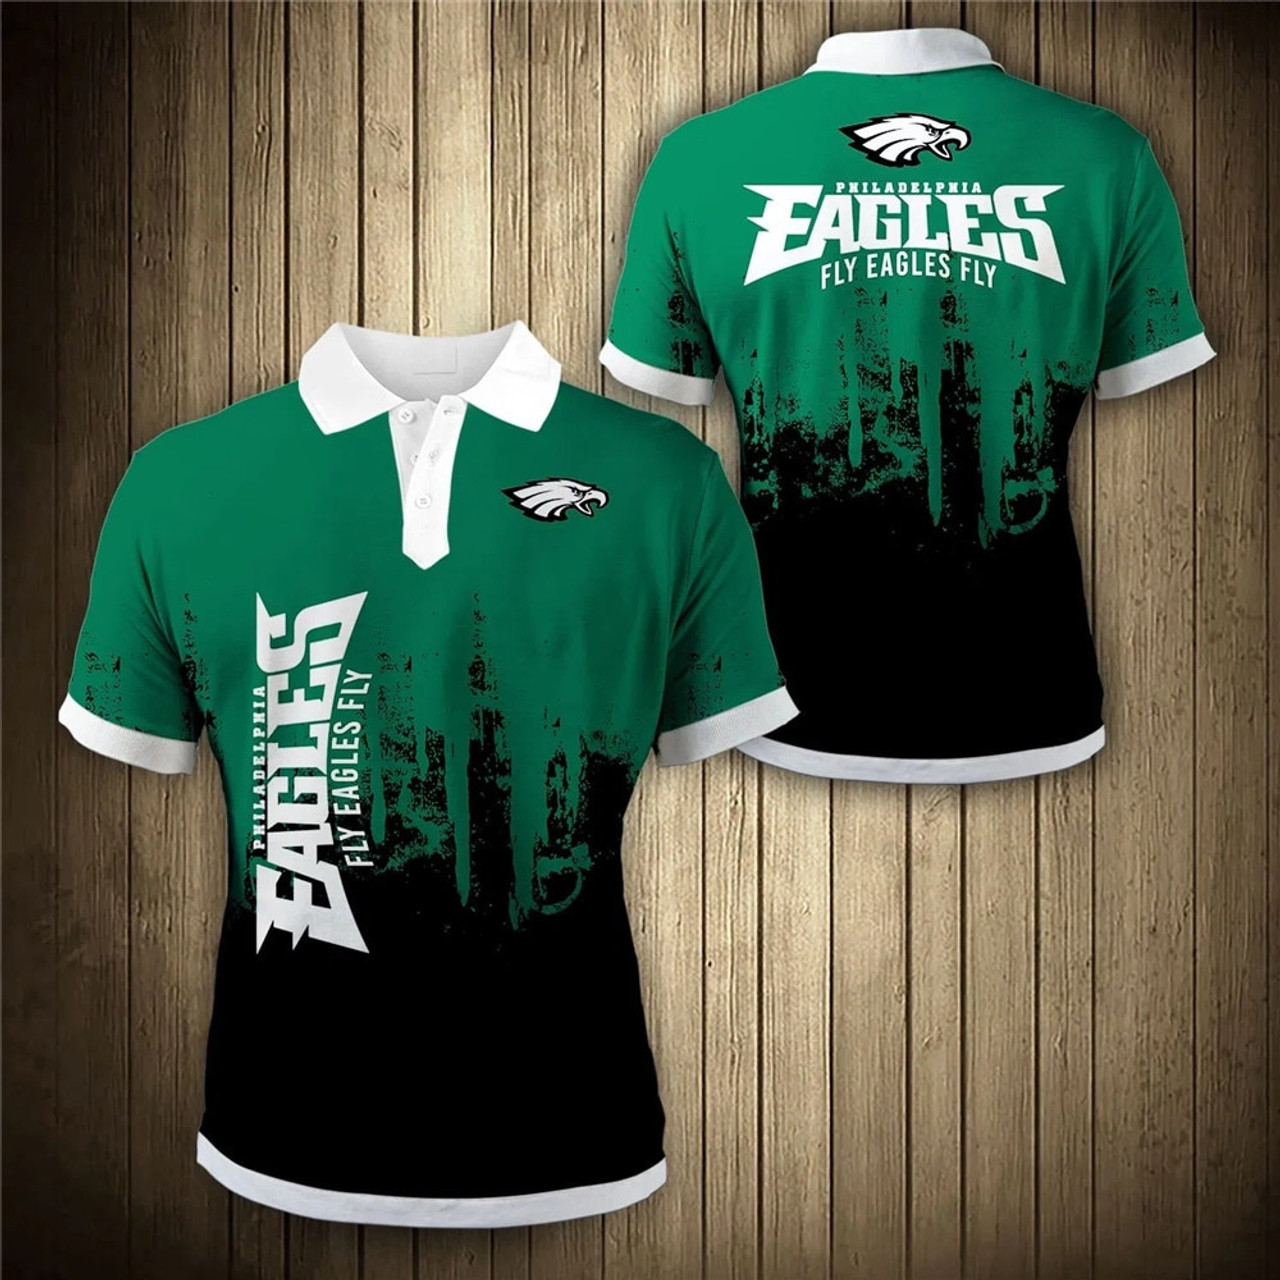 **(OFFICIAL-NEW-N.F.L.PHILADELPHIA-EAGLES-TRENDY-TEAM-POLO-SHIRTS/CUSTOM-3D-EAGLES-OFFICIAL-LOGOS & OFFICIAL-CLASSIC-EAGLES-TEAM-COLORS/DETAILED-CUSTOM-3D-GRAPHIC-PRINTED-DOUBLE-SIDED-DESIGN/PREMIUM-N.F.L.EAGLES-GAME-DAY-TEAM-FASHION-POLO-SHIRTS)**